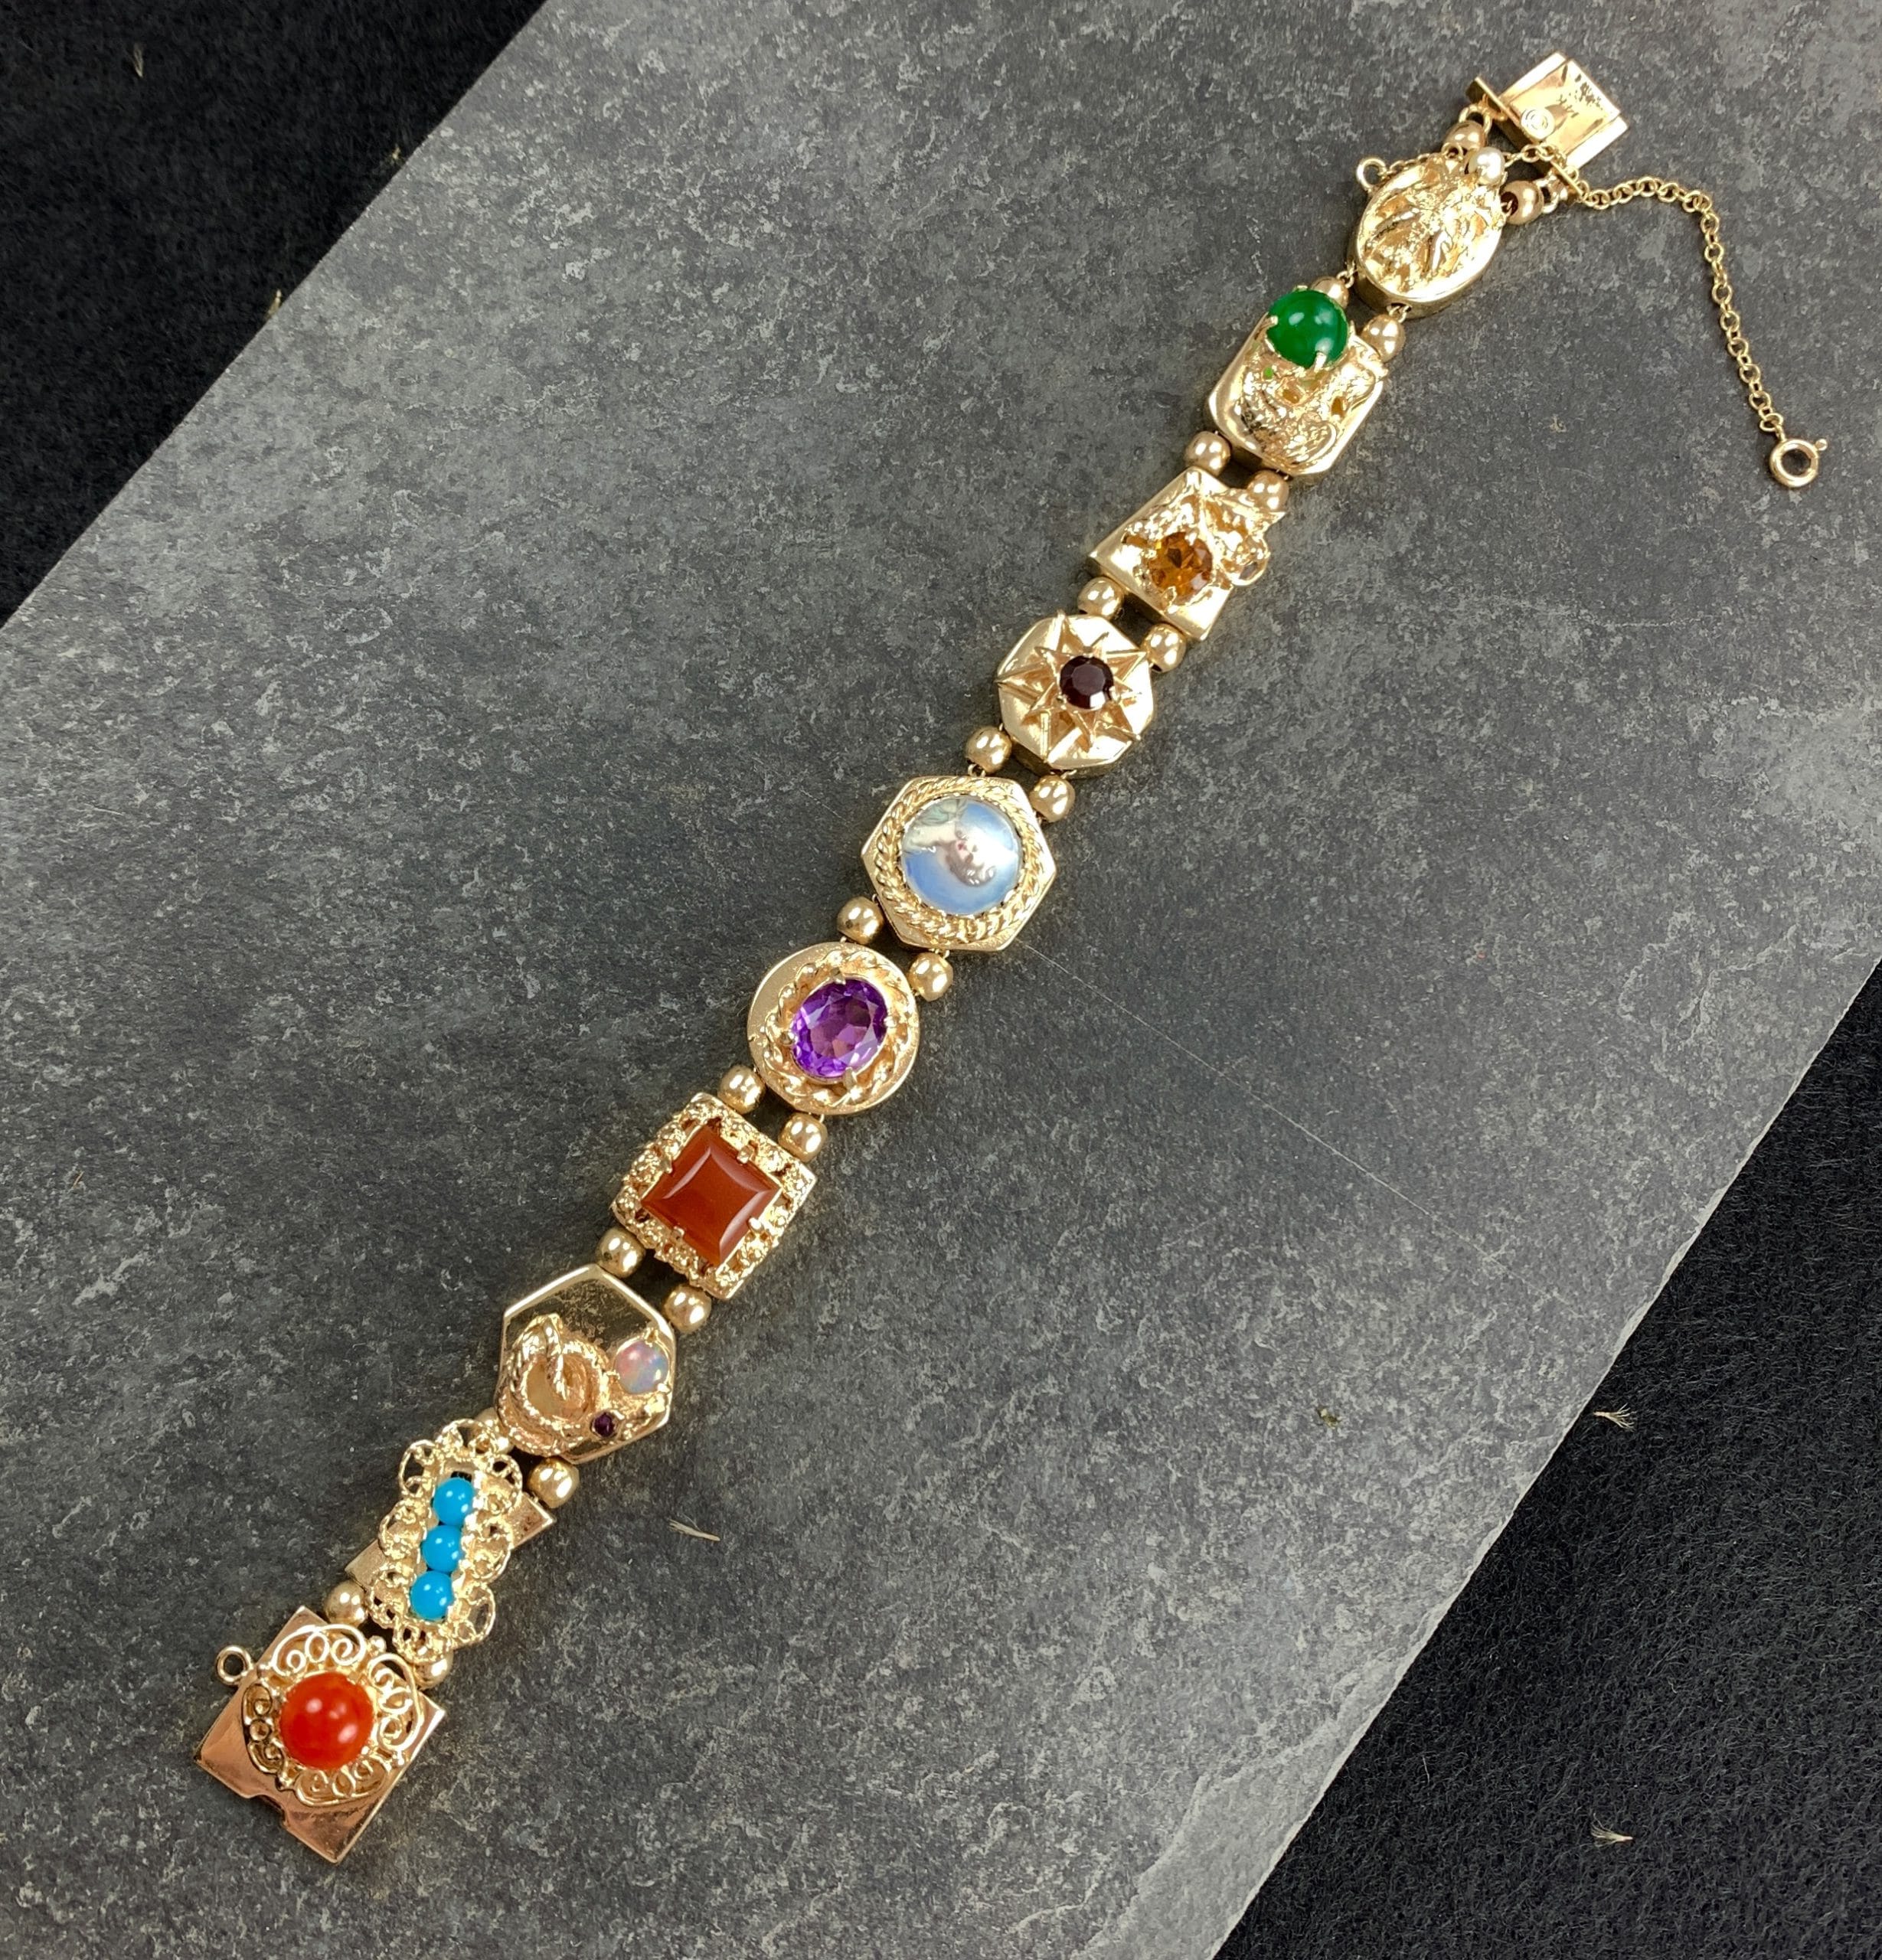 Vintage Artistic Multi Groves, Blvd. 14k Bend Stone Big Bracelet (A2486) Yellow in 7821 with | and - Gold | MO | Summit Jewelers Gems Webster Enamel 63119